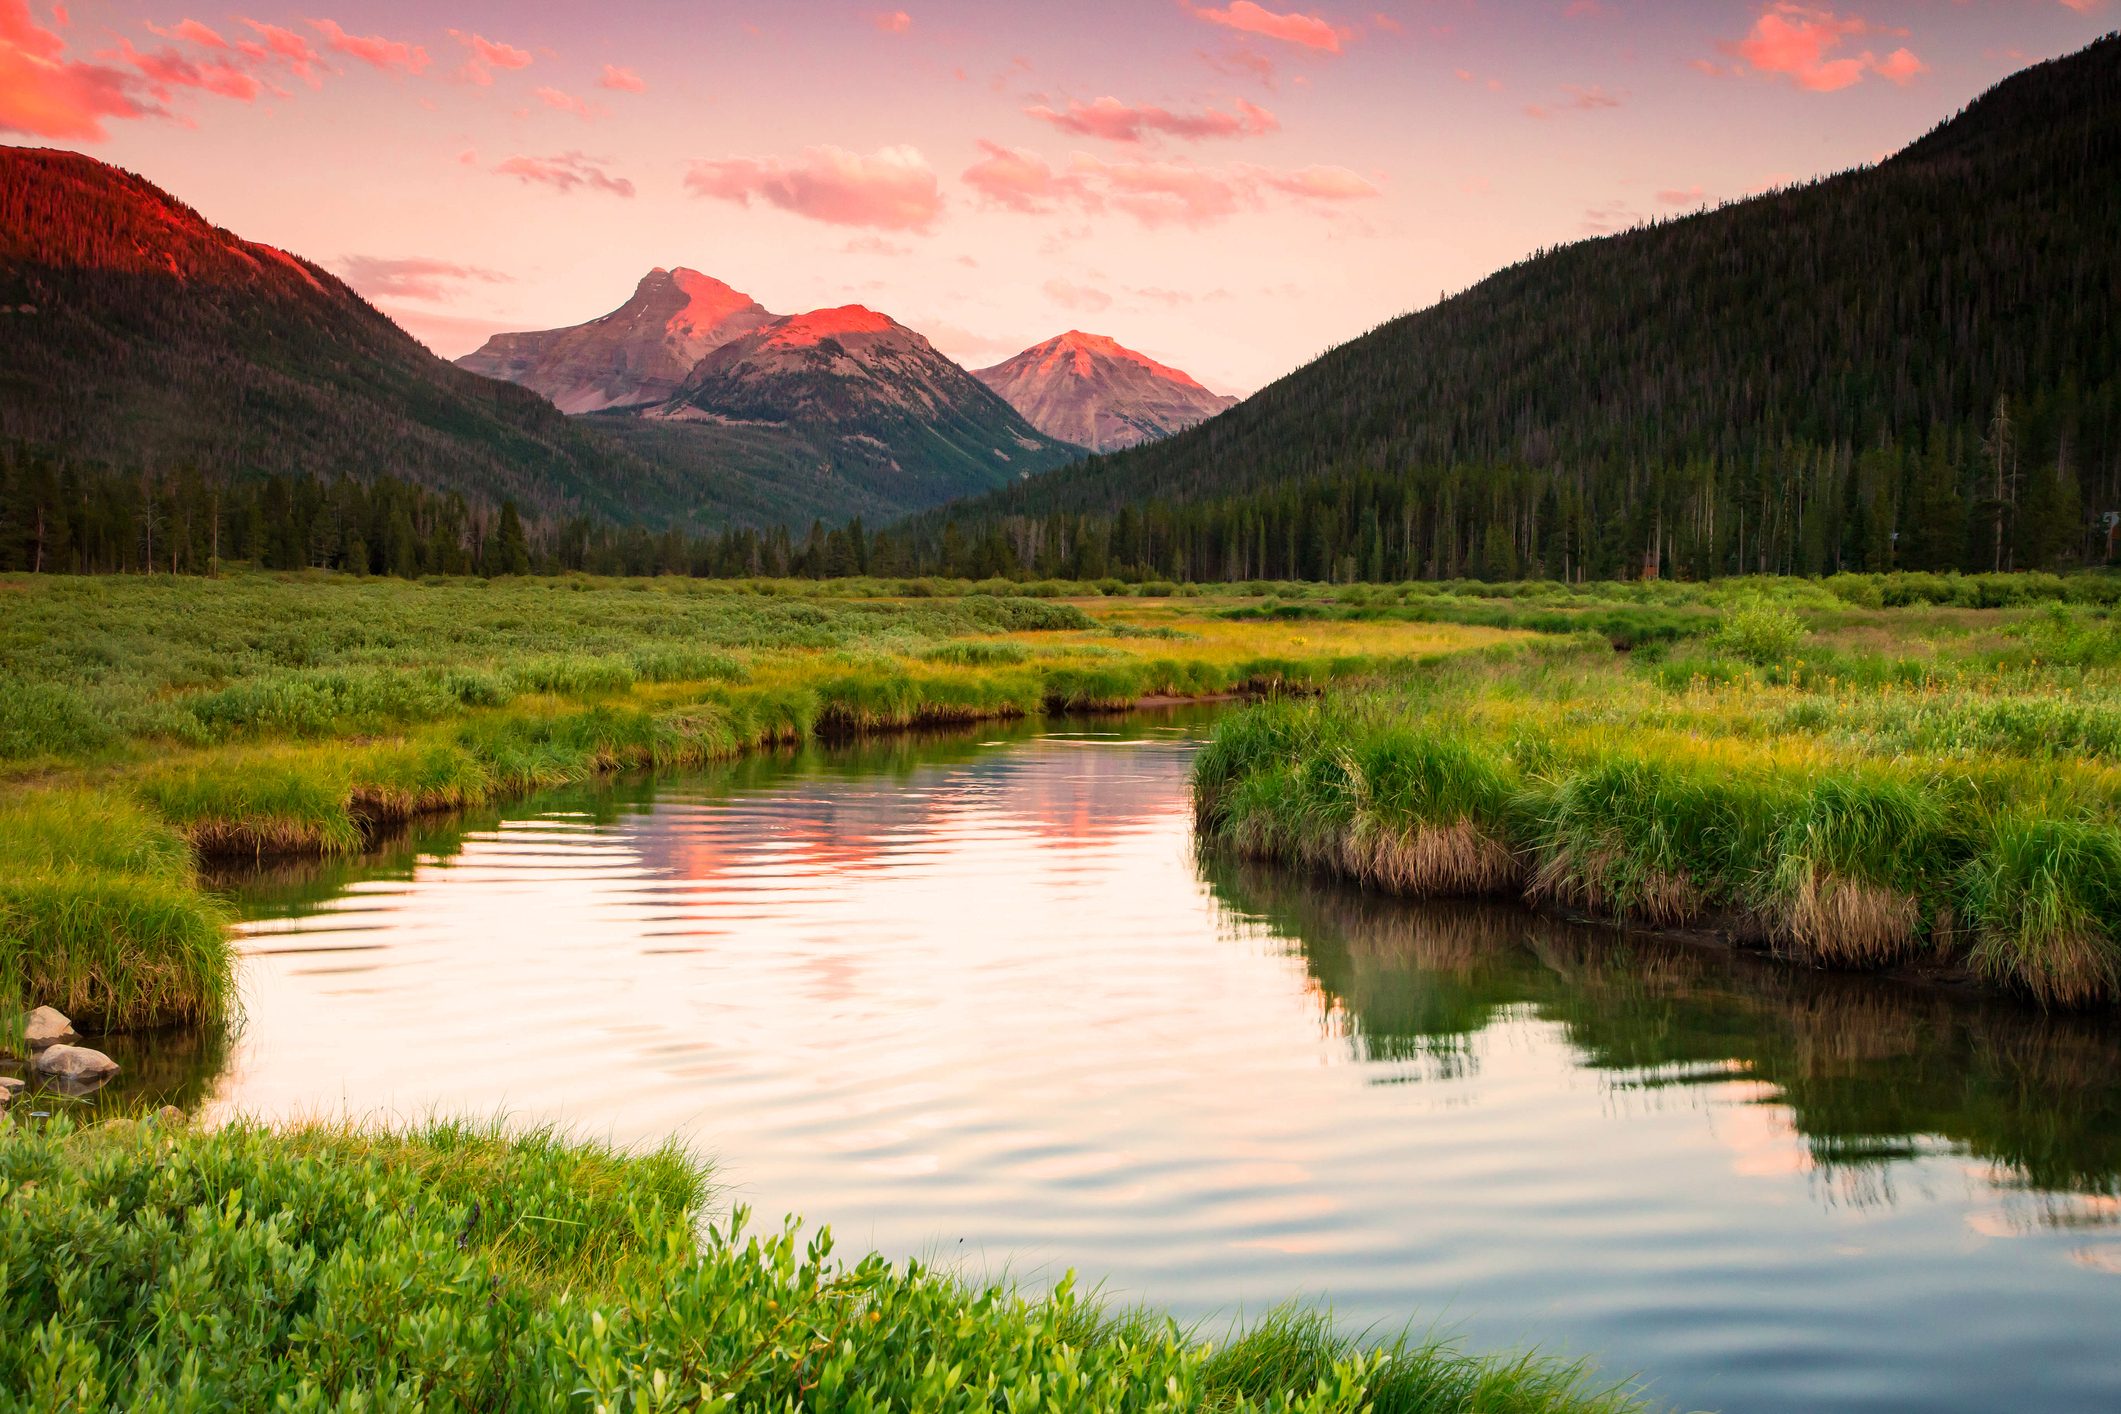 Bear River flowing through grasslands with mountains in the background at sunset.